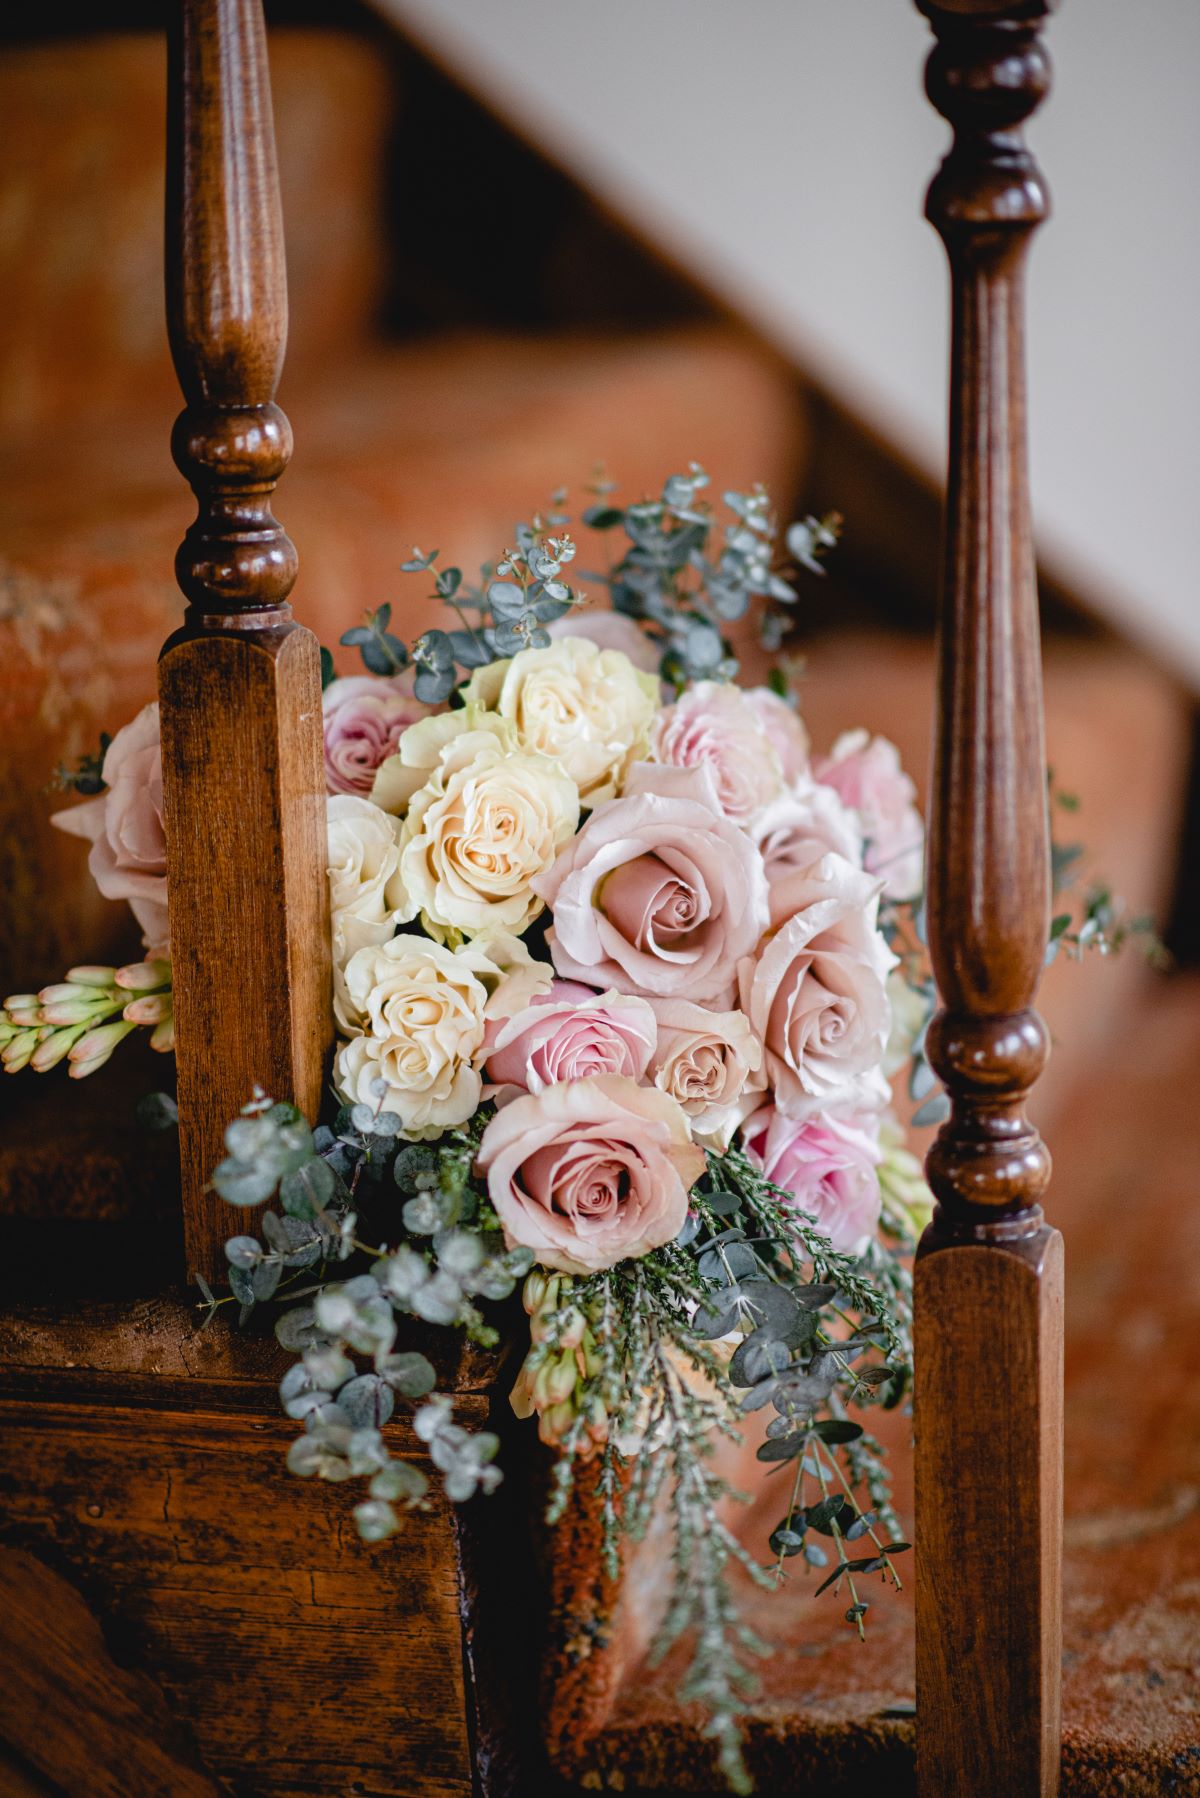 A pink bouquet on carpeted stairs